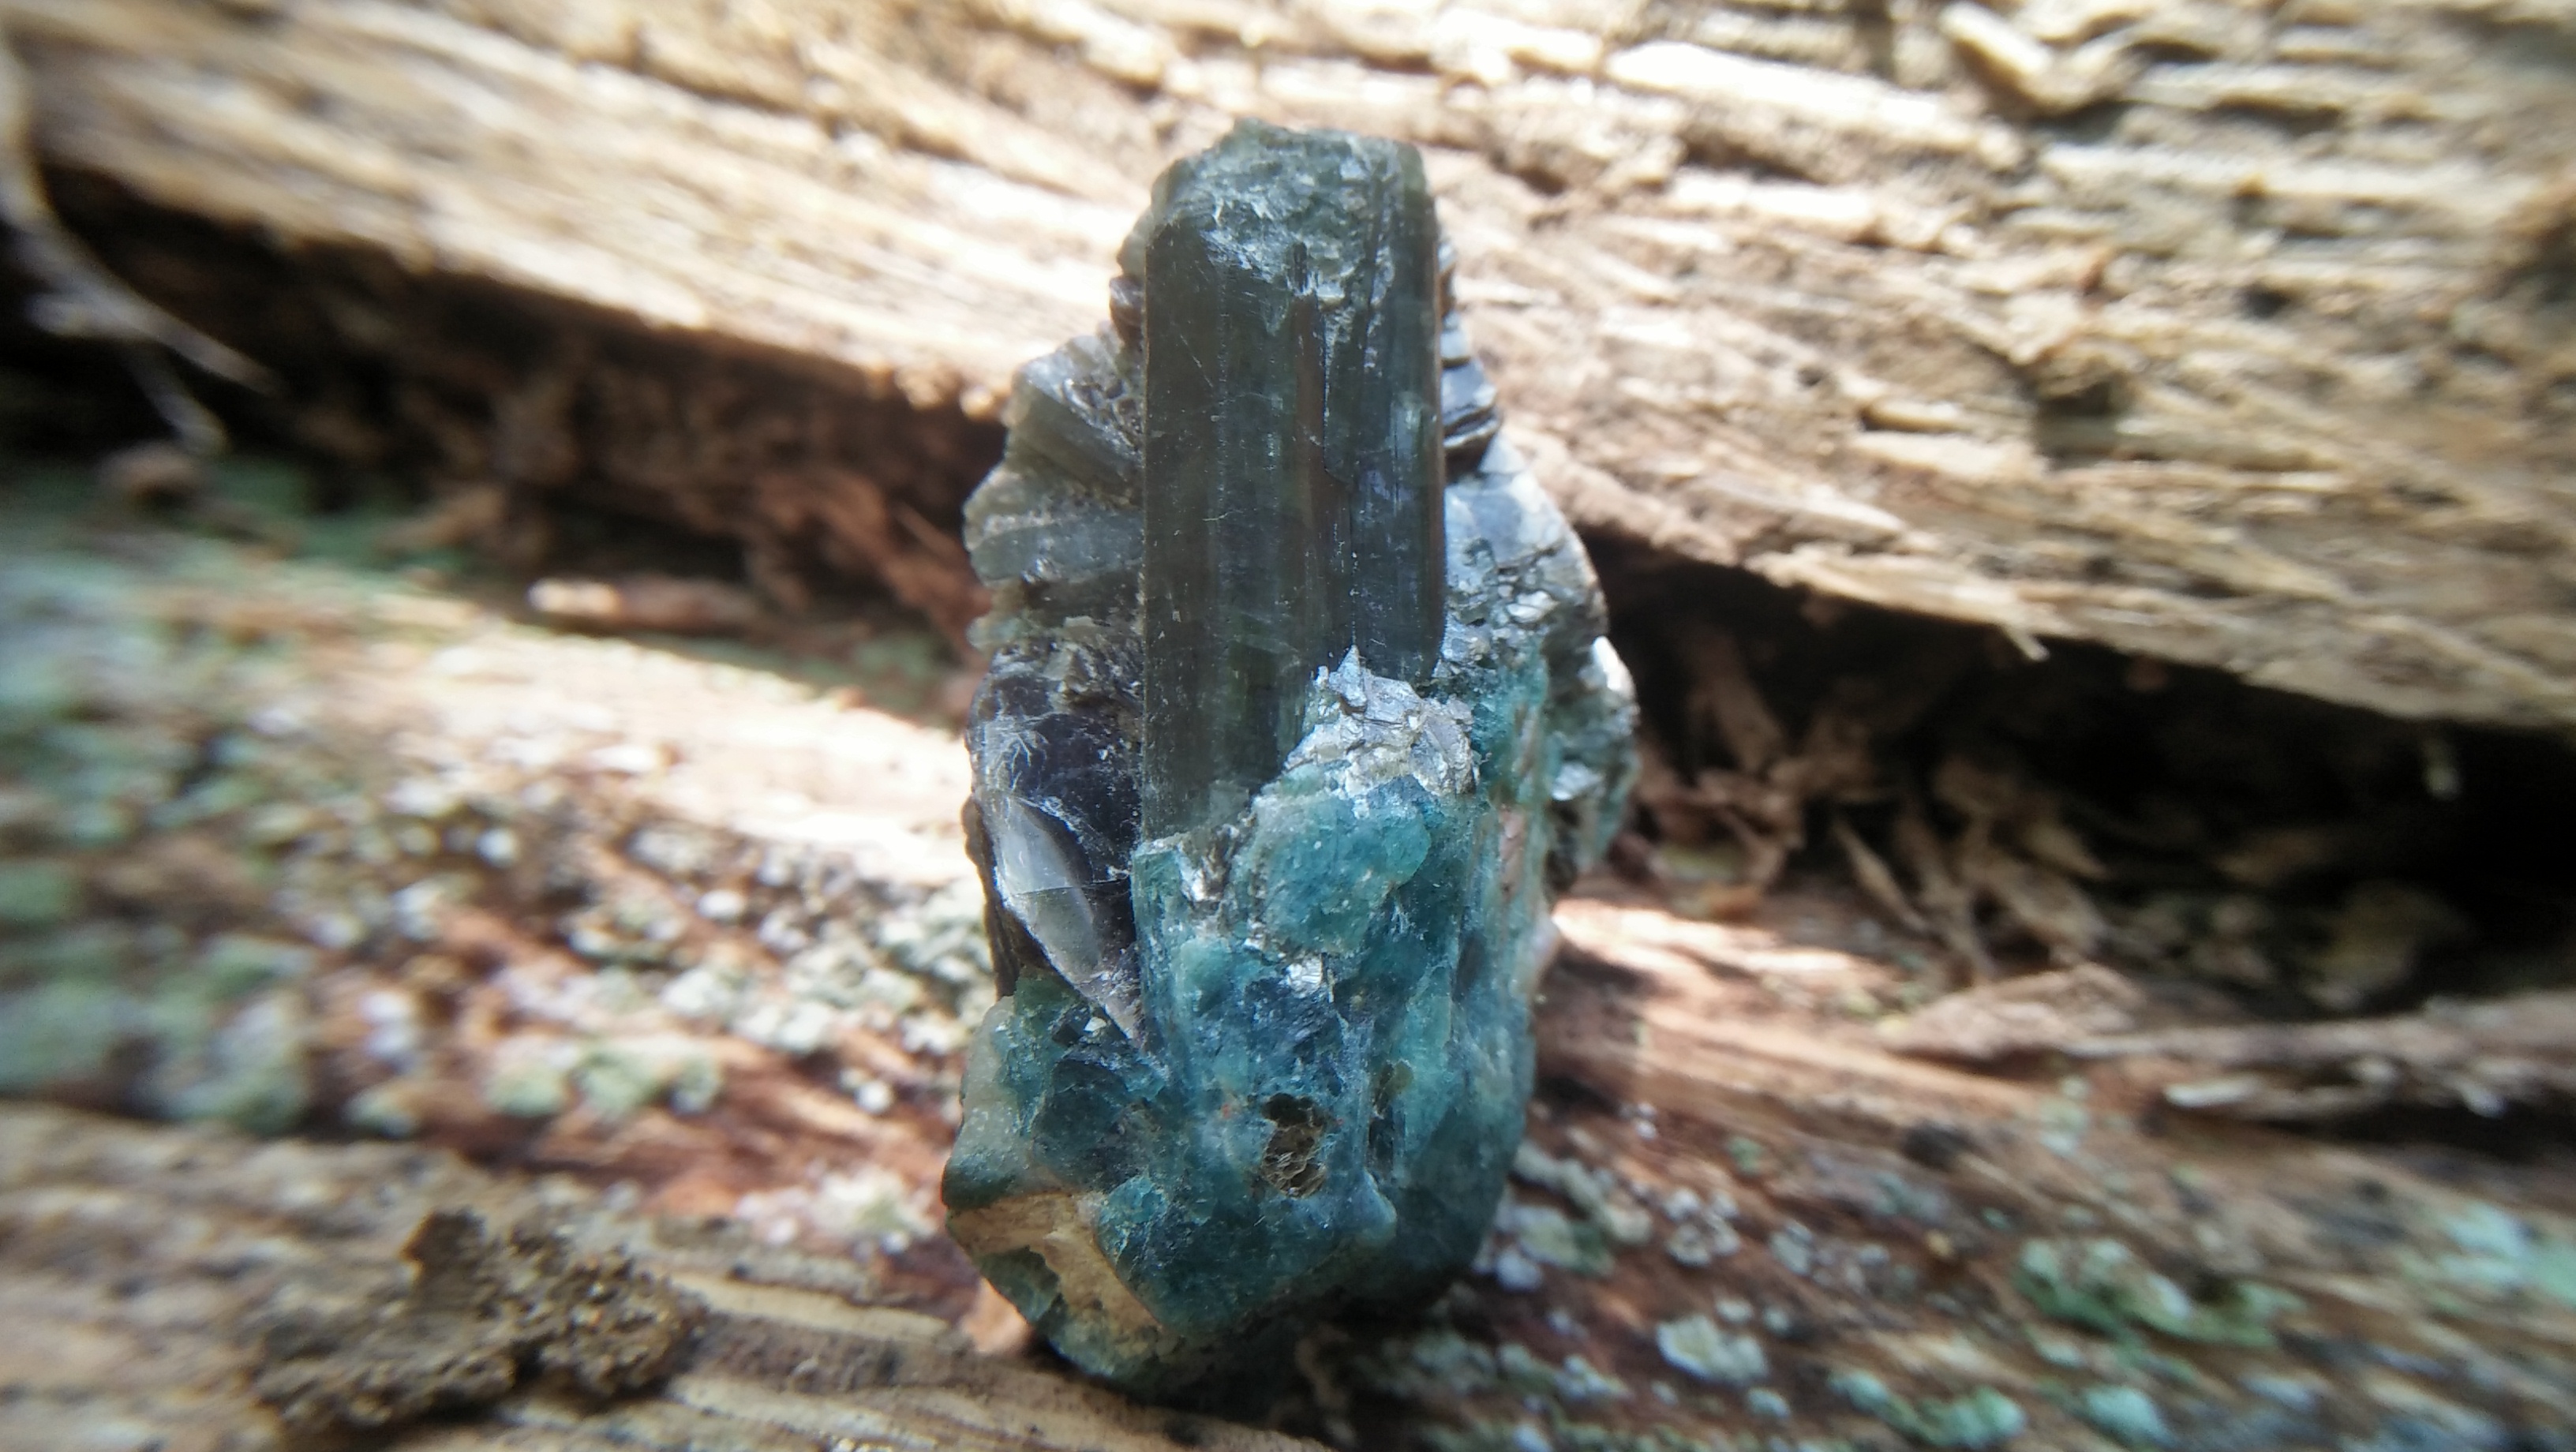 Extremely Rare Gemstone - Natural Grandidierite Grandidierite is an extremely rare mineral and gem that was first discovered in 1902 in southern Madagascar. Grandidierite is nesosilicates mineral with the chemical formula (Mg, Fe2+)(Al, Fe3+)3(SiO4)(BO3)O2.                                                                  It is found colors such as Bluish-green, greenish-blue with 7½ hardness according to the more hardness scale. Grandidierite can be seen Vitreous, Pearly luster stones with 2.98 - 2.99 Specific Gravity. This gemstone was named in honor of French explorer Alfred Grandidier who studied the natural history of Madagascar. He is a French explorer and Naturalist. Grandidierite has very strong dispersion and Visible Pleochroism, It is a Nesosilicates orthorhombic Mineral with Biaxial (-) Optical Properties. Inside of grandidierite mostly can be seen very perfect cleavages. As an optical properties, it has a 1.583 - 1.639 refractive index. Grandidierite can be found in India, Germany, Denmark, Malawi, Namibia, India, Norway, and Sri Lanka. Grandidierite's main source is Madagascar. Healing Properties of Grandidierite Grandidierite is a blue gemstone that promotes spiritual awakening, peace, and tranquility and can encourage you to communicate in a calm and clear manner.